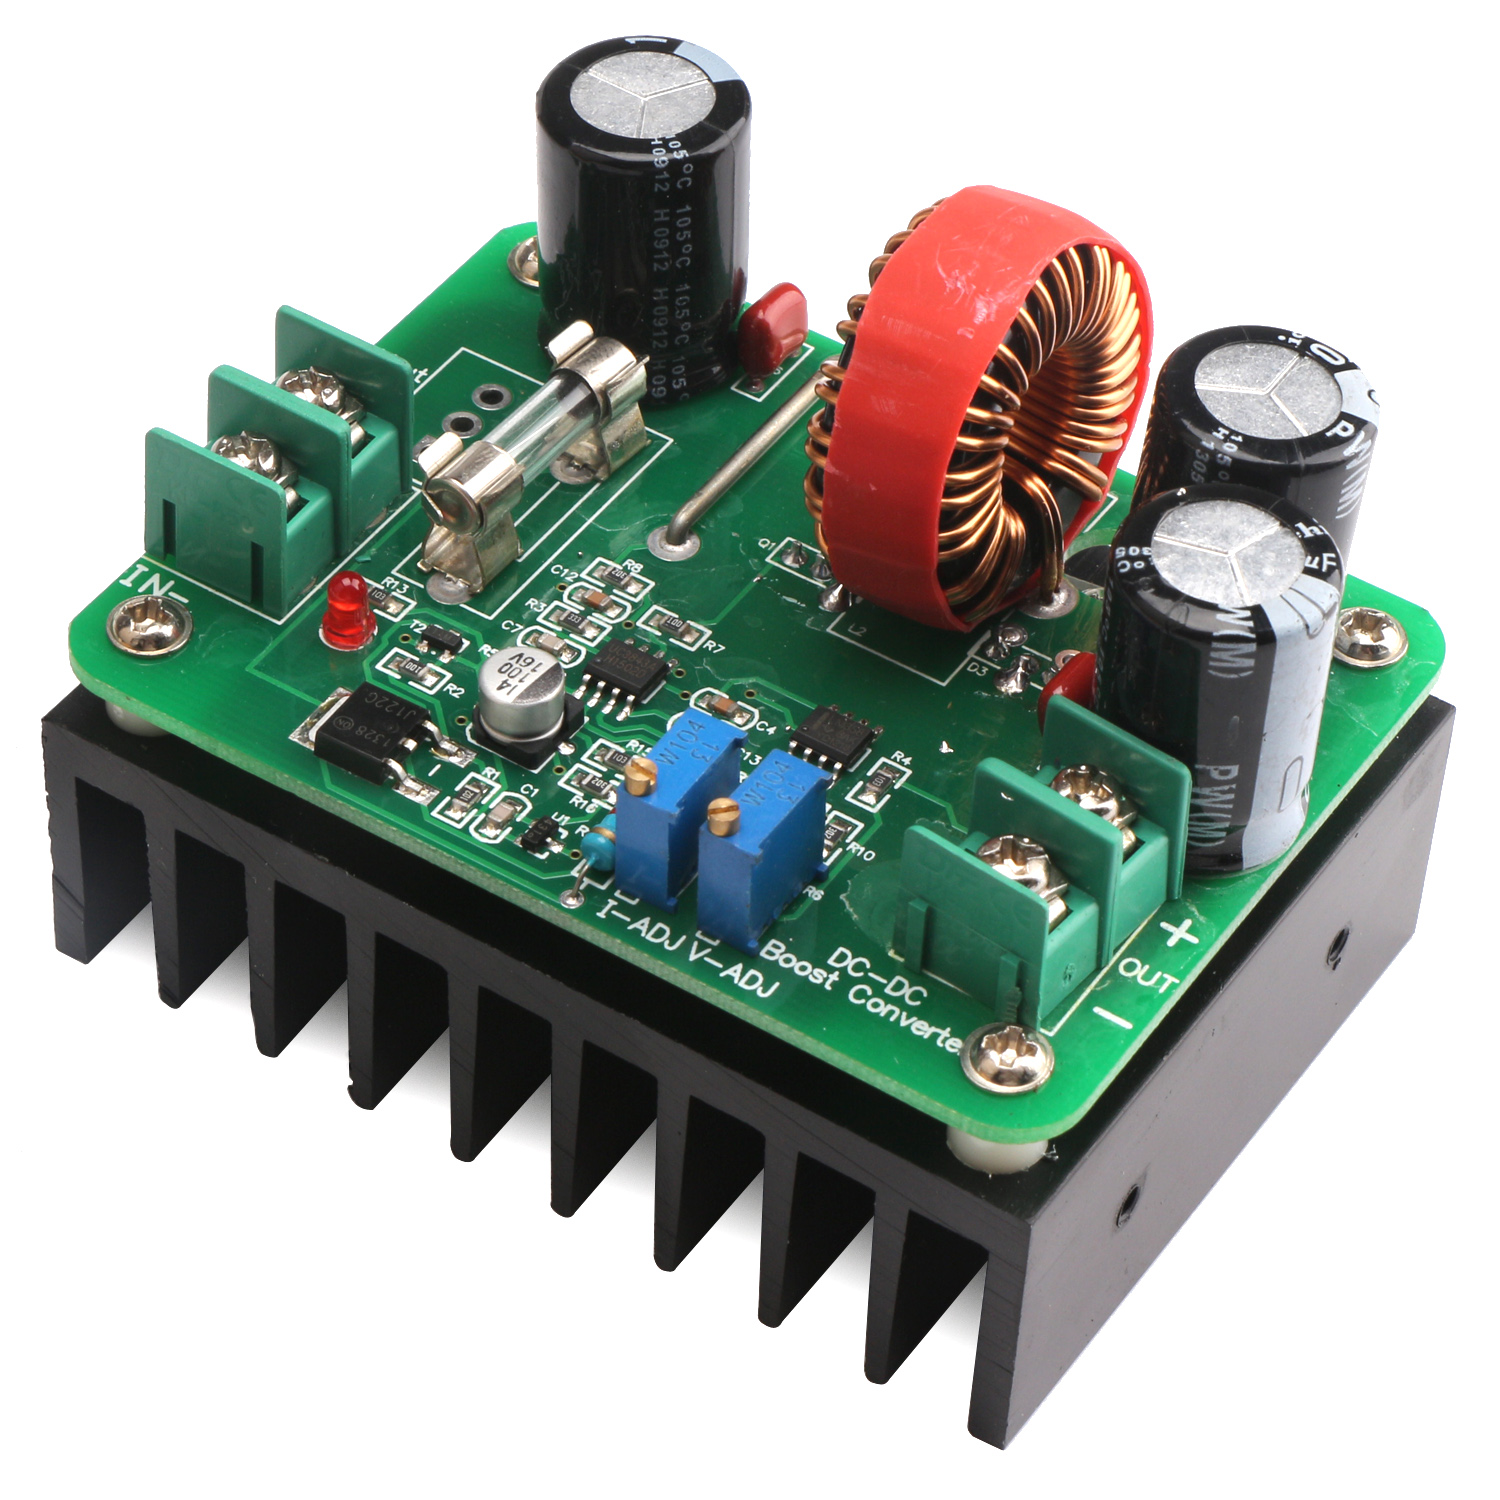 DC-DC 600W 10-60V to 12-80V Boost Converter Step-up Module car Power Supply 